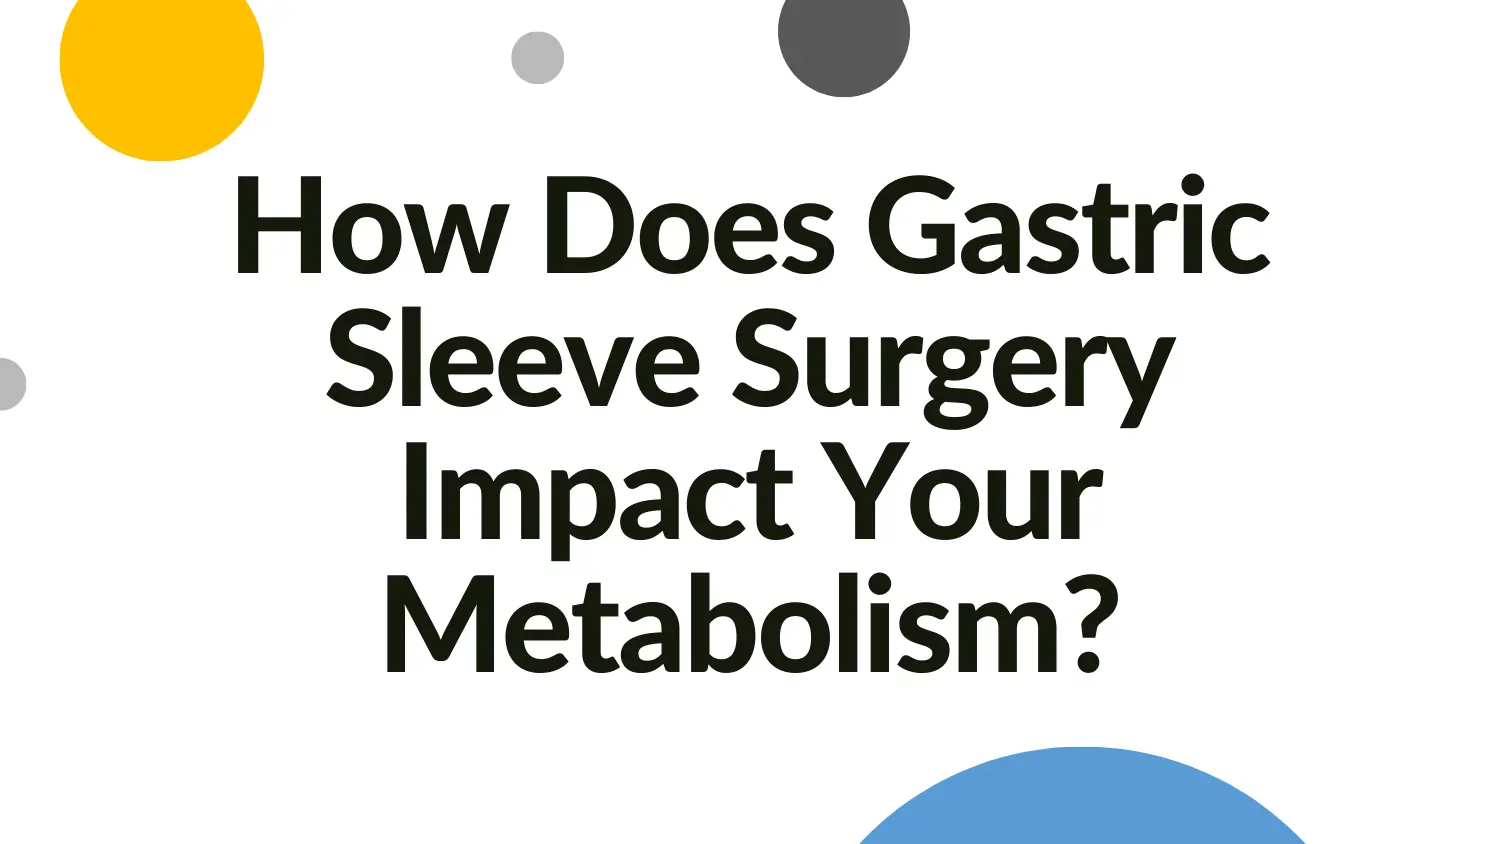 How Does Gastric Sleeve Surgery Impact Your Metabolism?